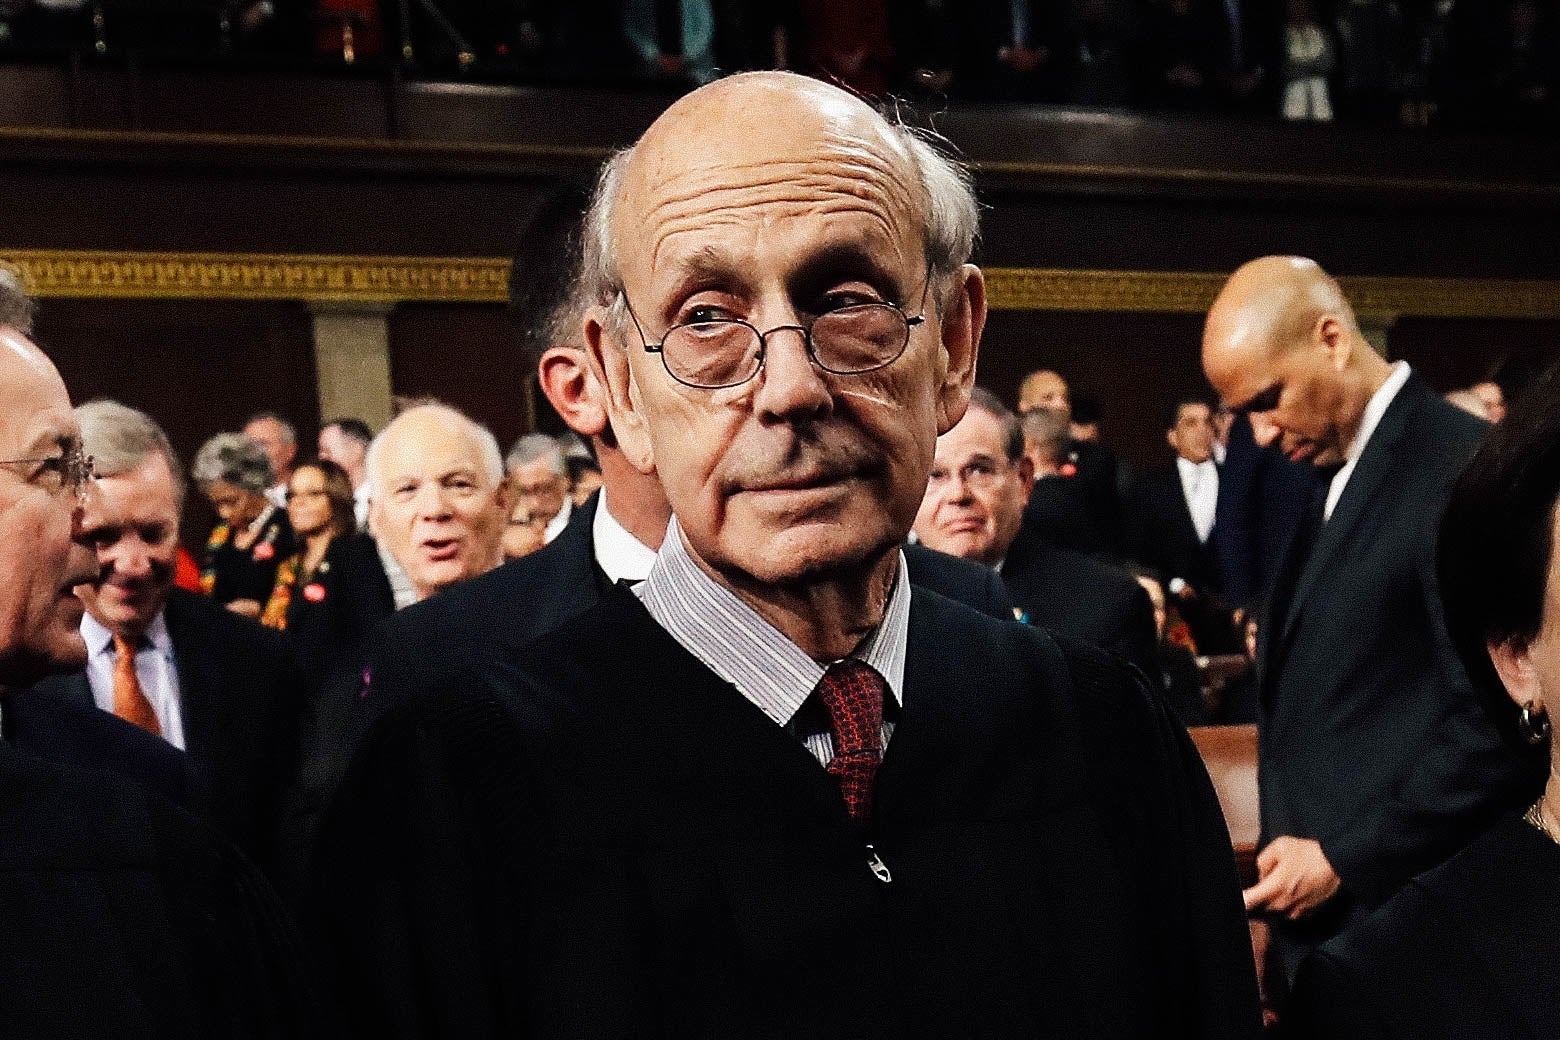 Breyer amid the audience assembled for the State of the Union address.